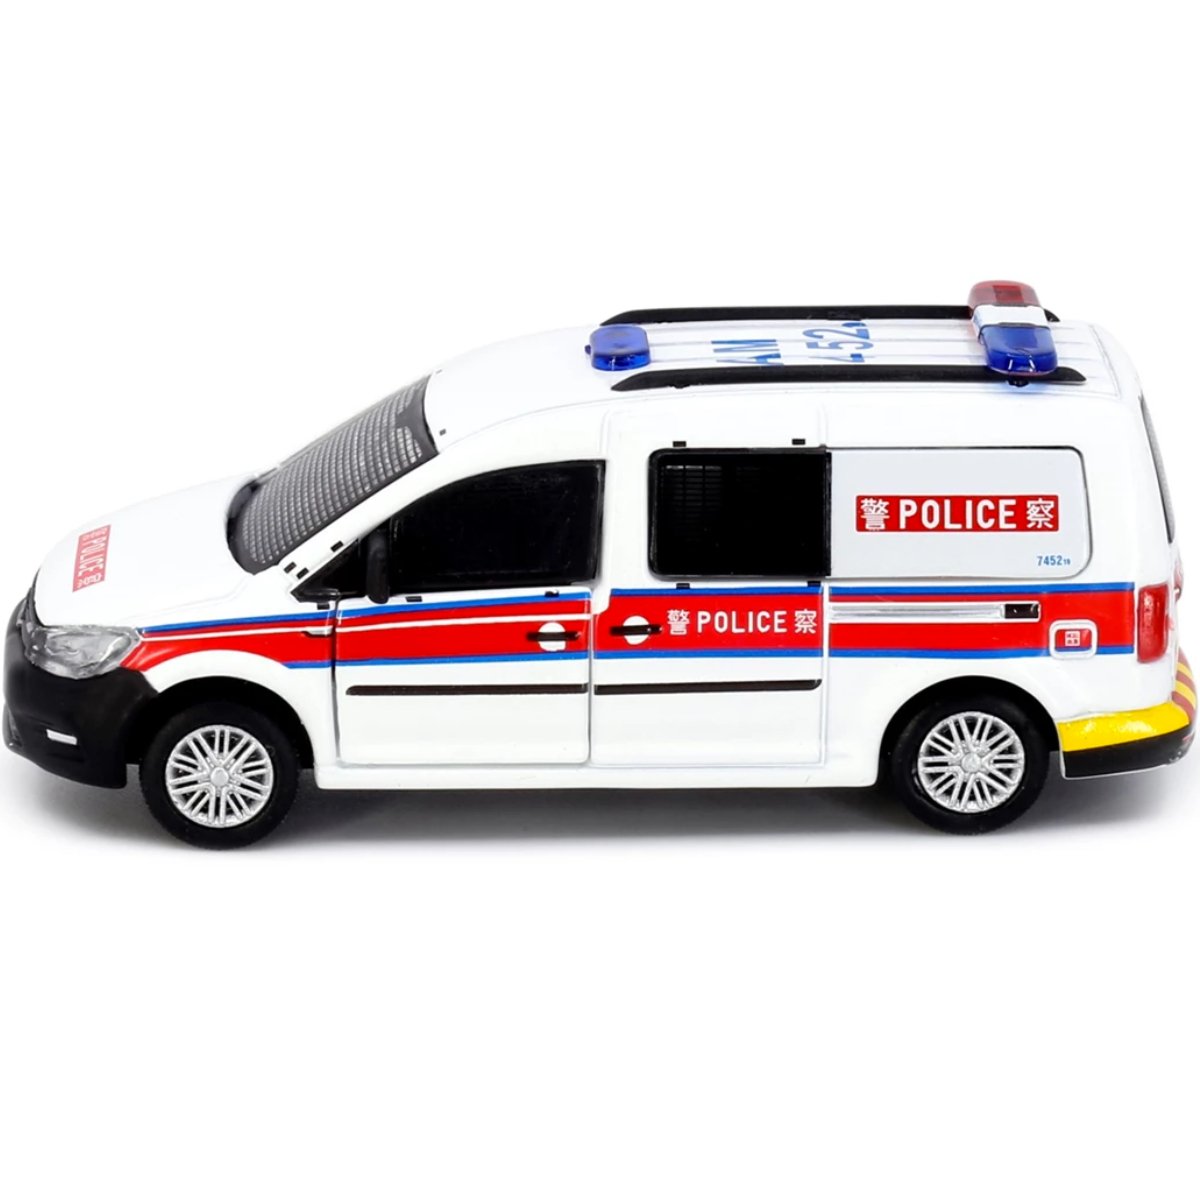 Tiny Models Volkswagen Caddy Hong Kong Police AM7452 (1:64 Scale) - Phillips Hobbies